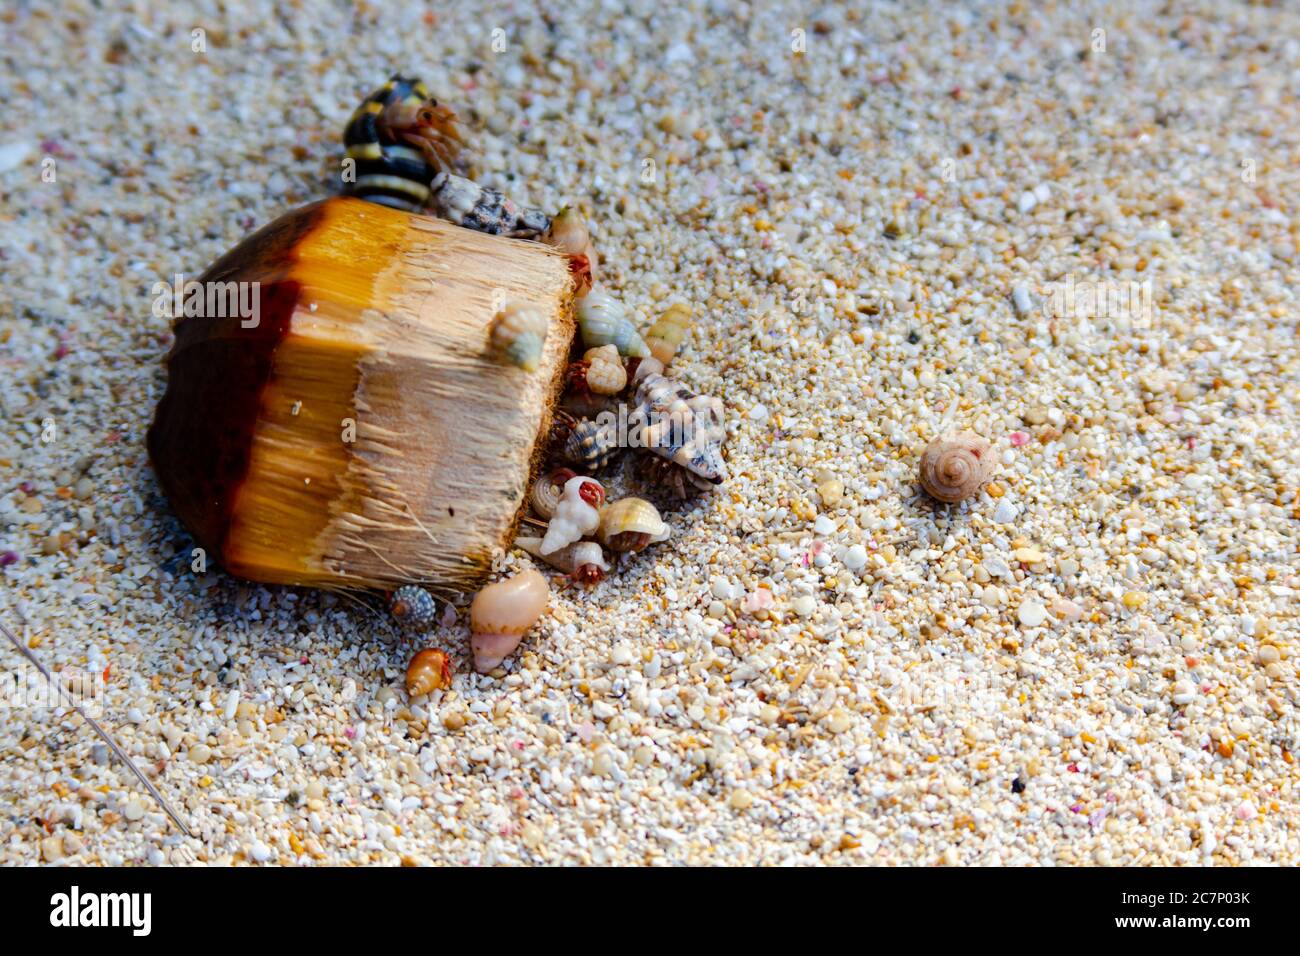 Tiny juvenile hermit crabs cluster around a palm tree seed on the coral sands of Okinawa, Japan. Stock Photo